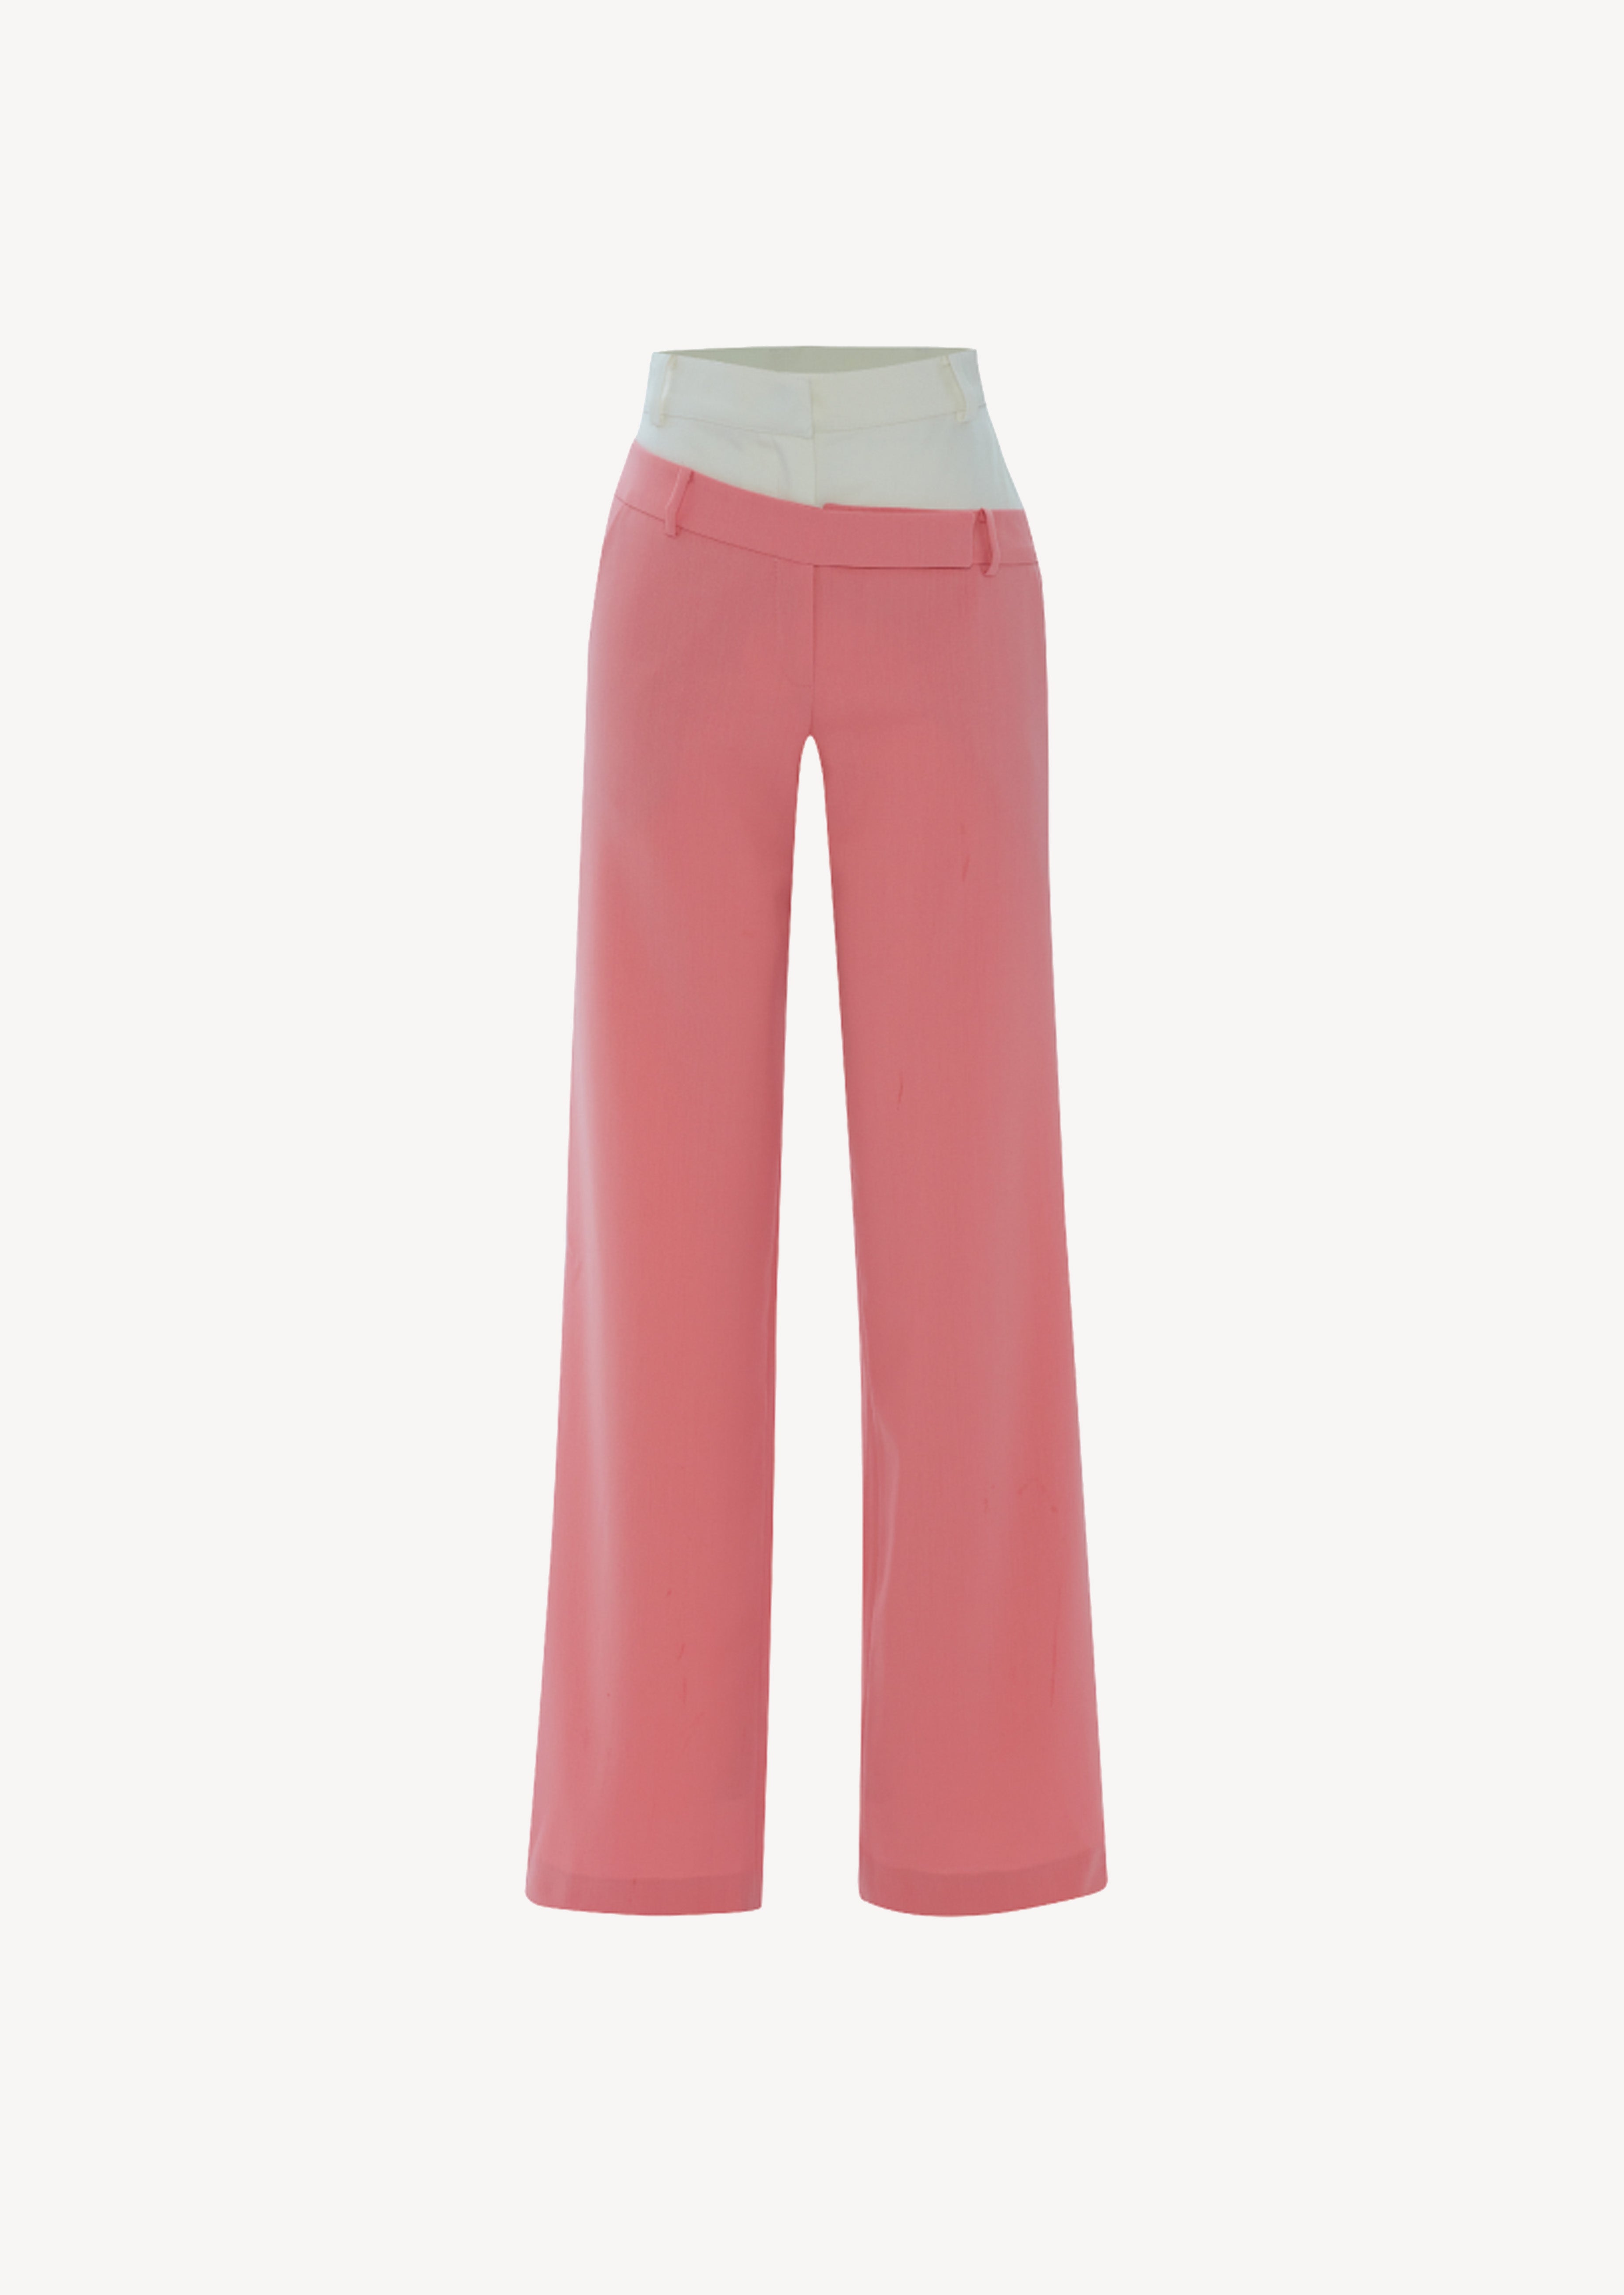 BABY PINK DOUBLE-WAISTED PANTS